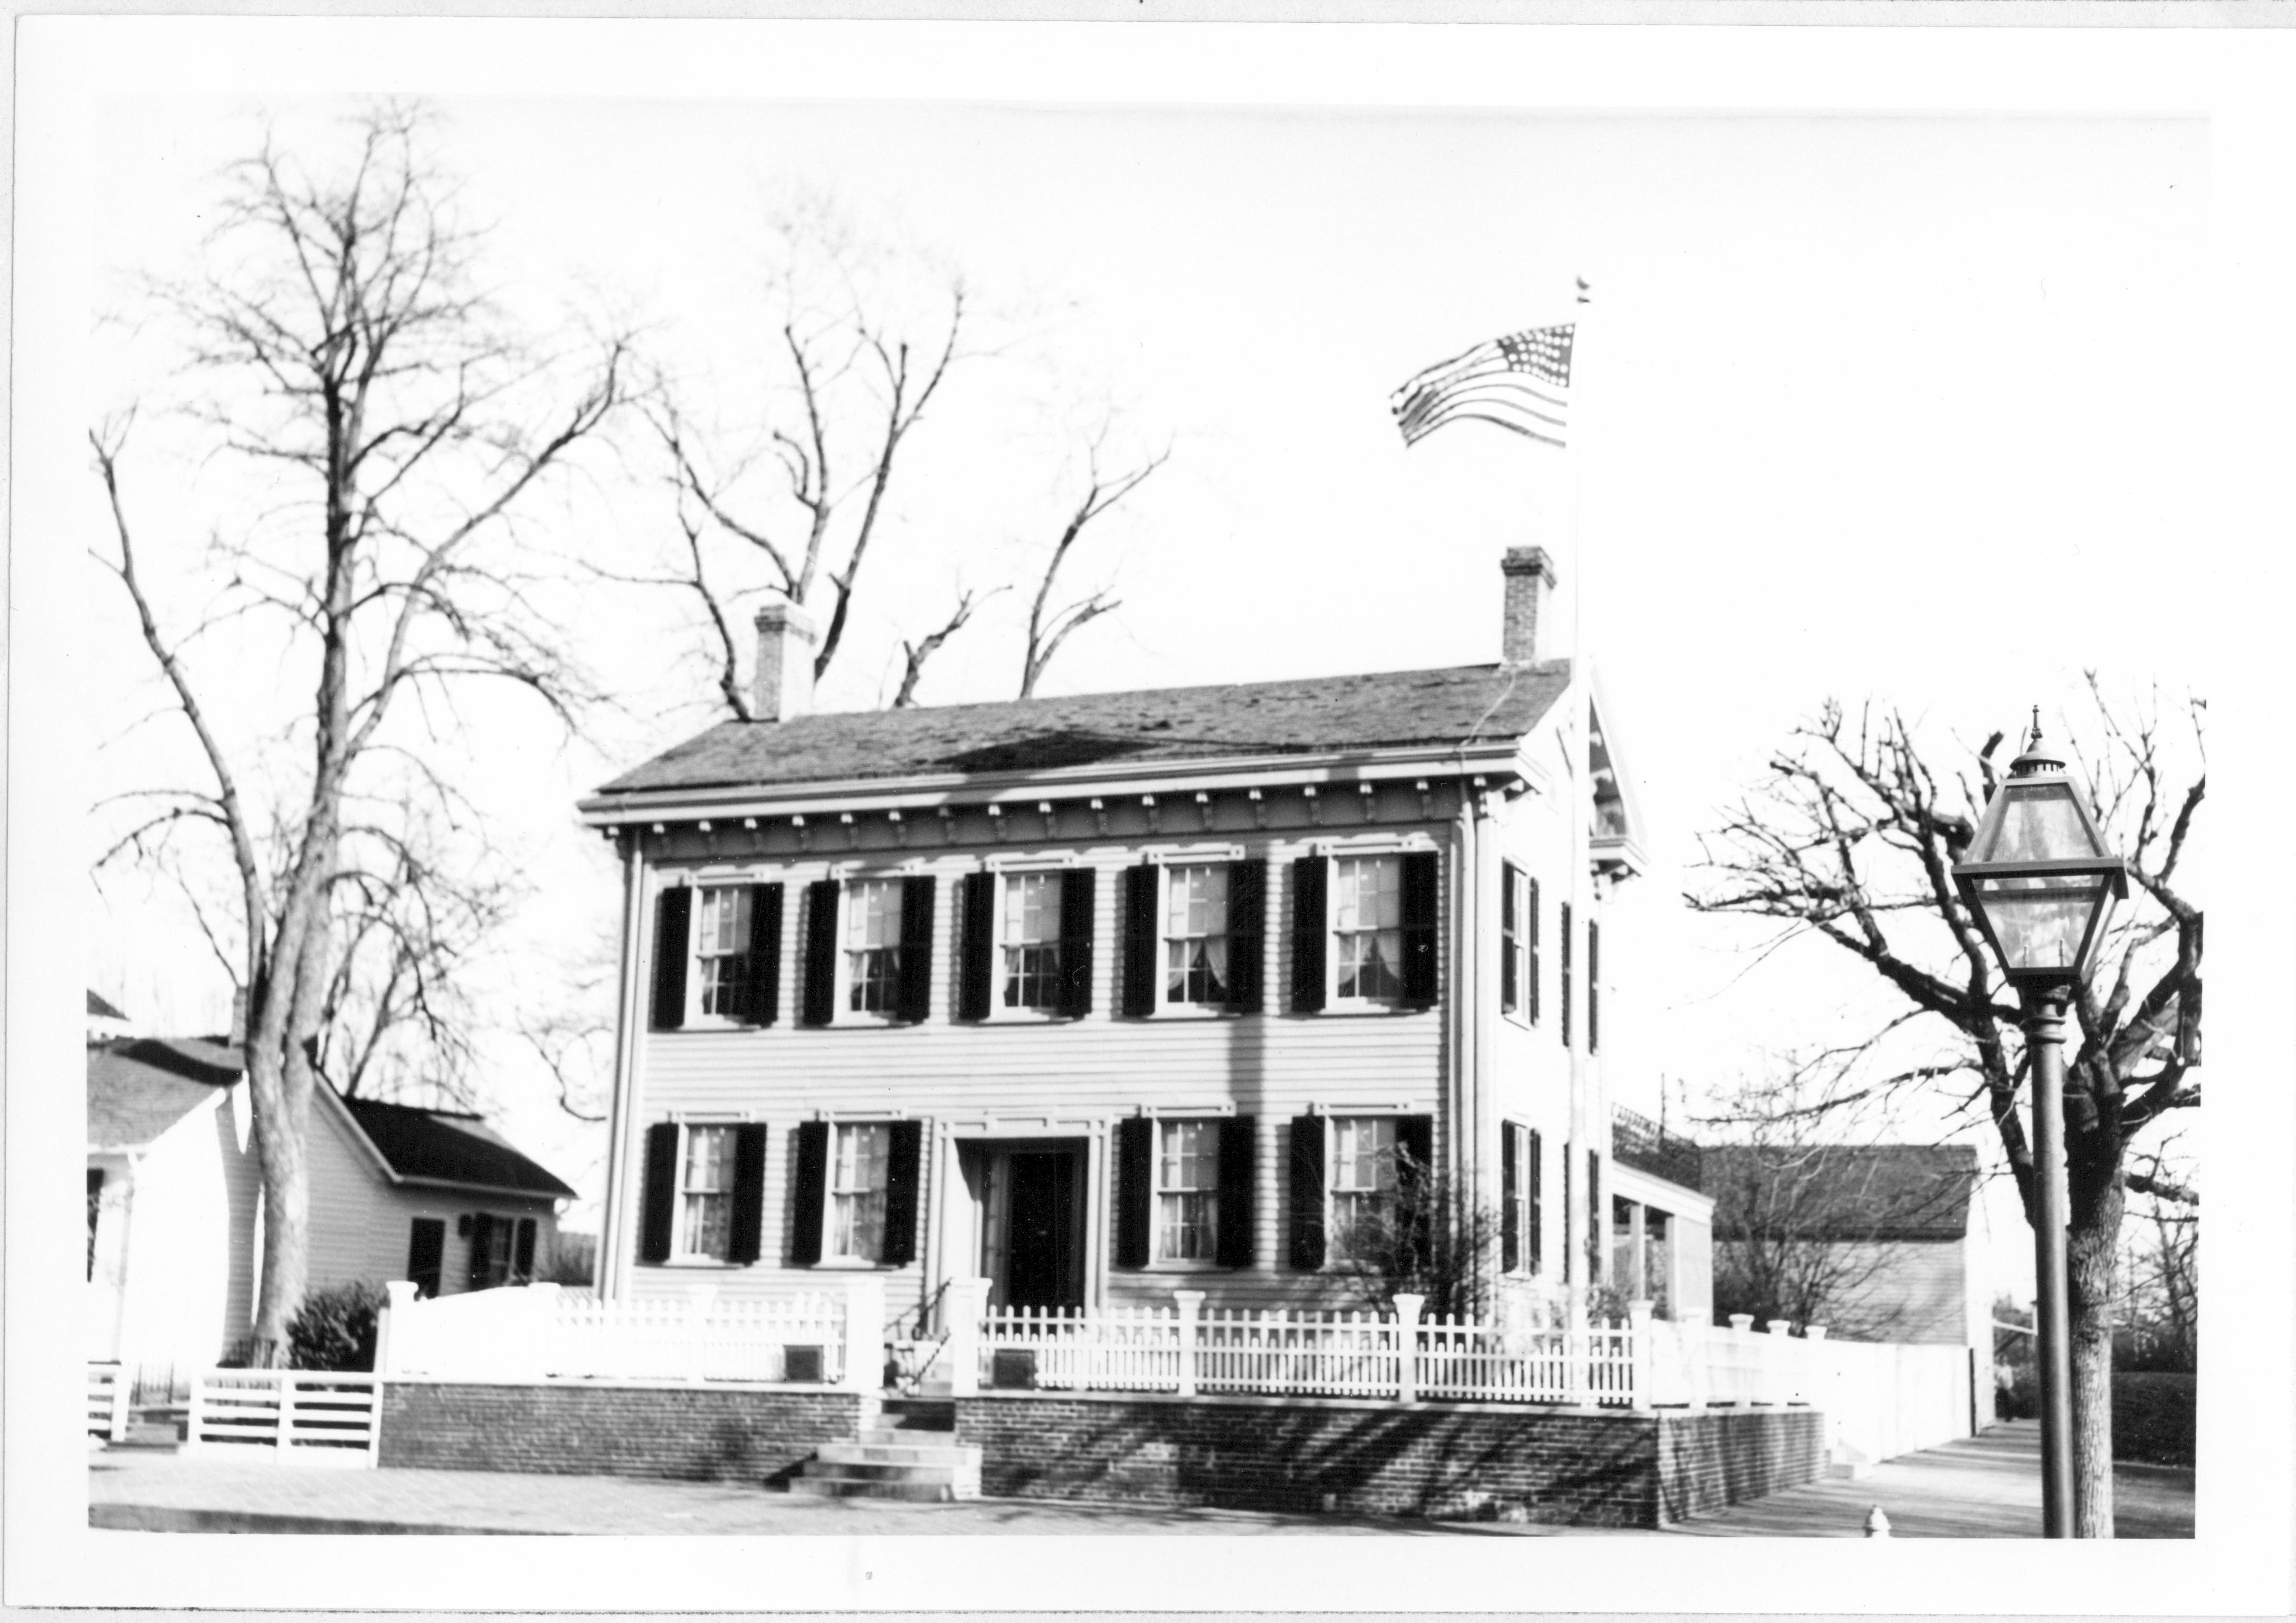 Lincoln Home west (front) elevation in winter, with flagpole in corner behind picket fence in corner. Lincoln Barn visible behind Home on right, Corneau house on left. Square commemorative plaques on either side of open gate. House appears to be painted white. Street light in foreground right. Looking East/Northeast from west side of 8th Street. Lincoln Home, Corneau, Lincoln Barn, painted white, 8th Street